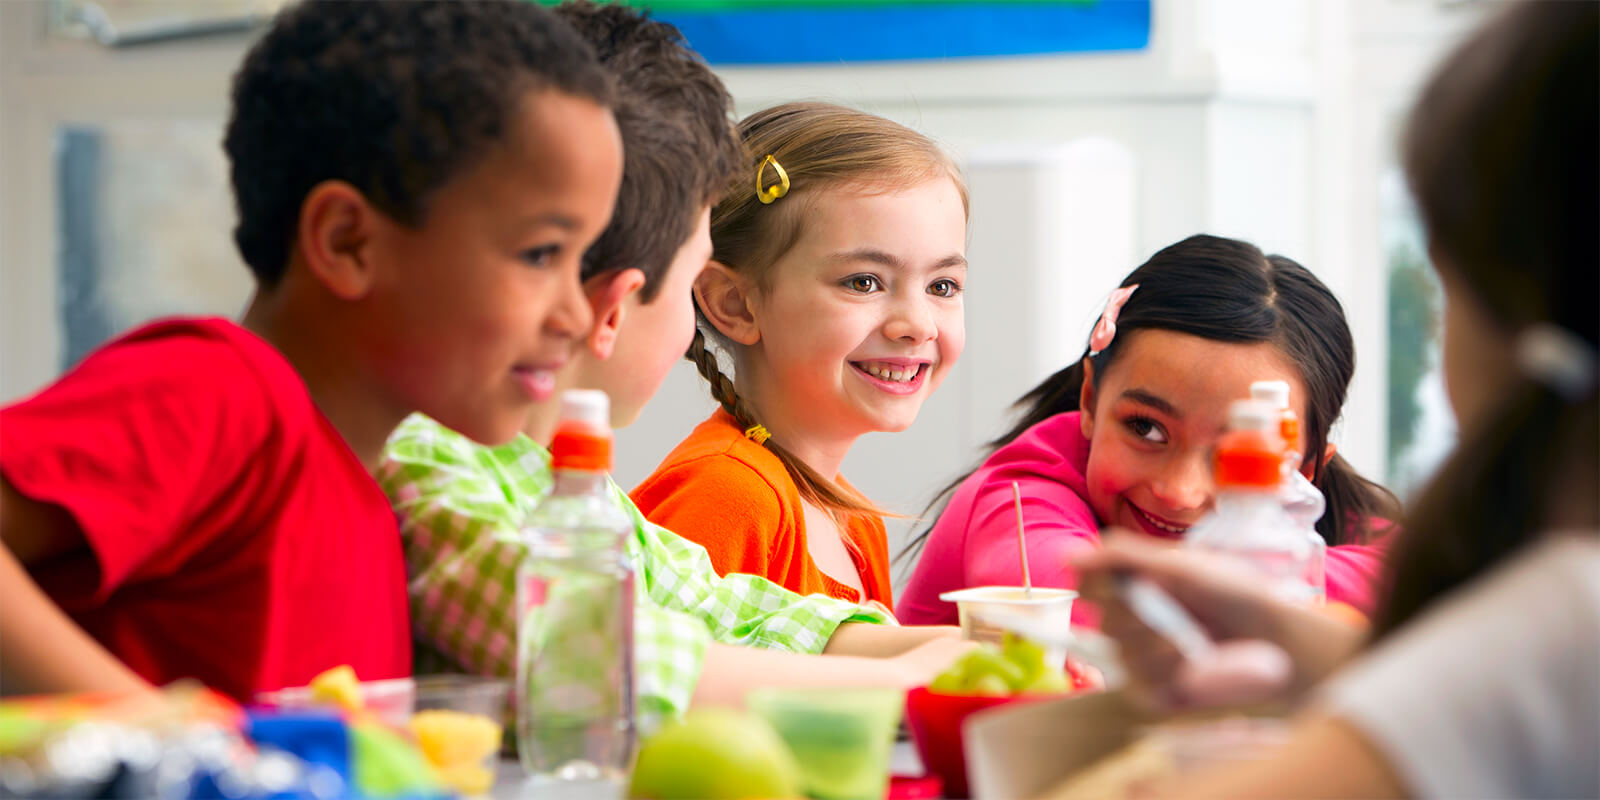 Improve child nutrition programs without delay, AFSCME tells Congress